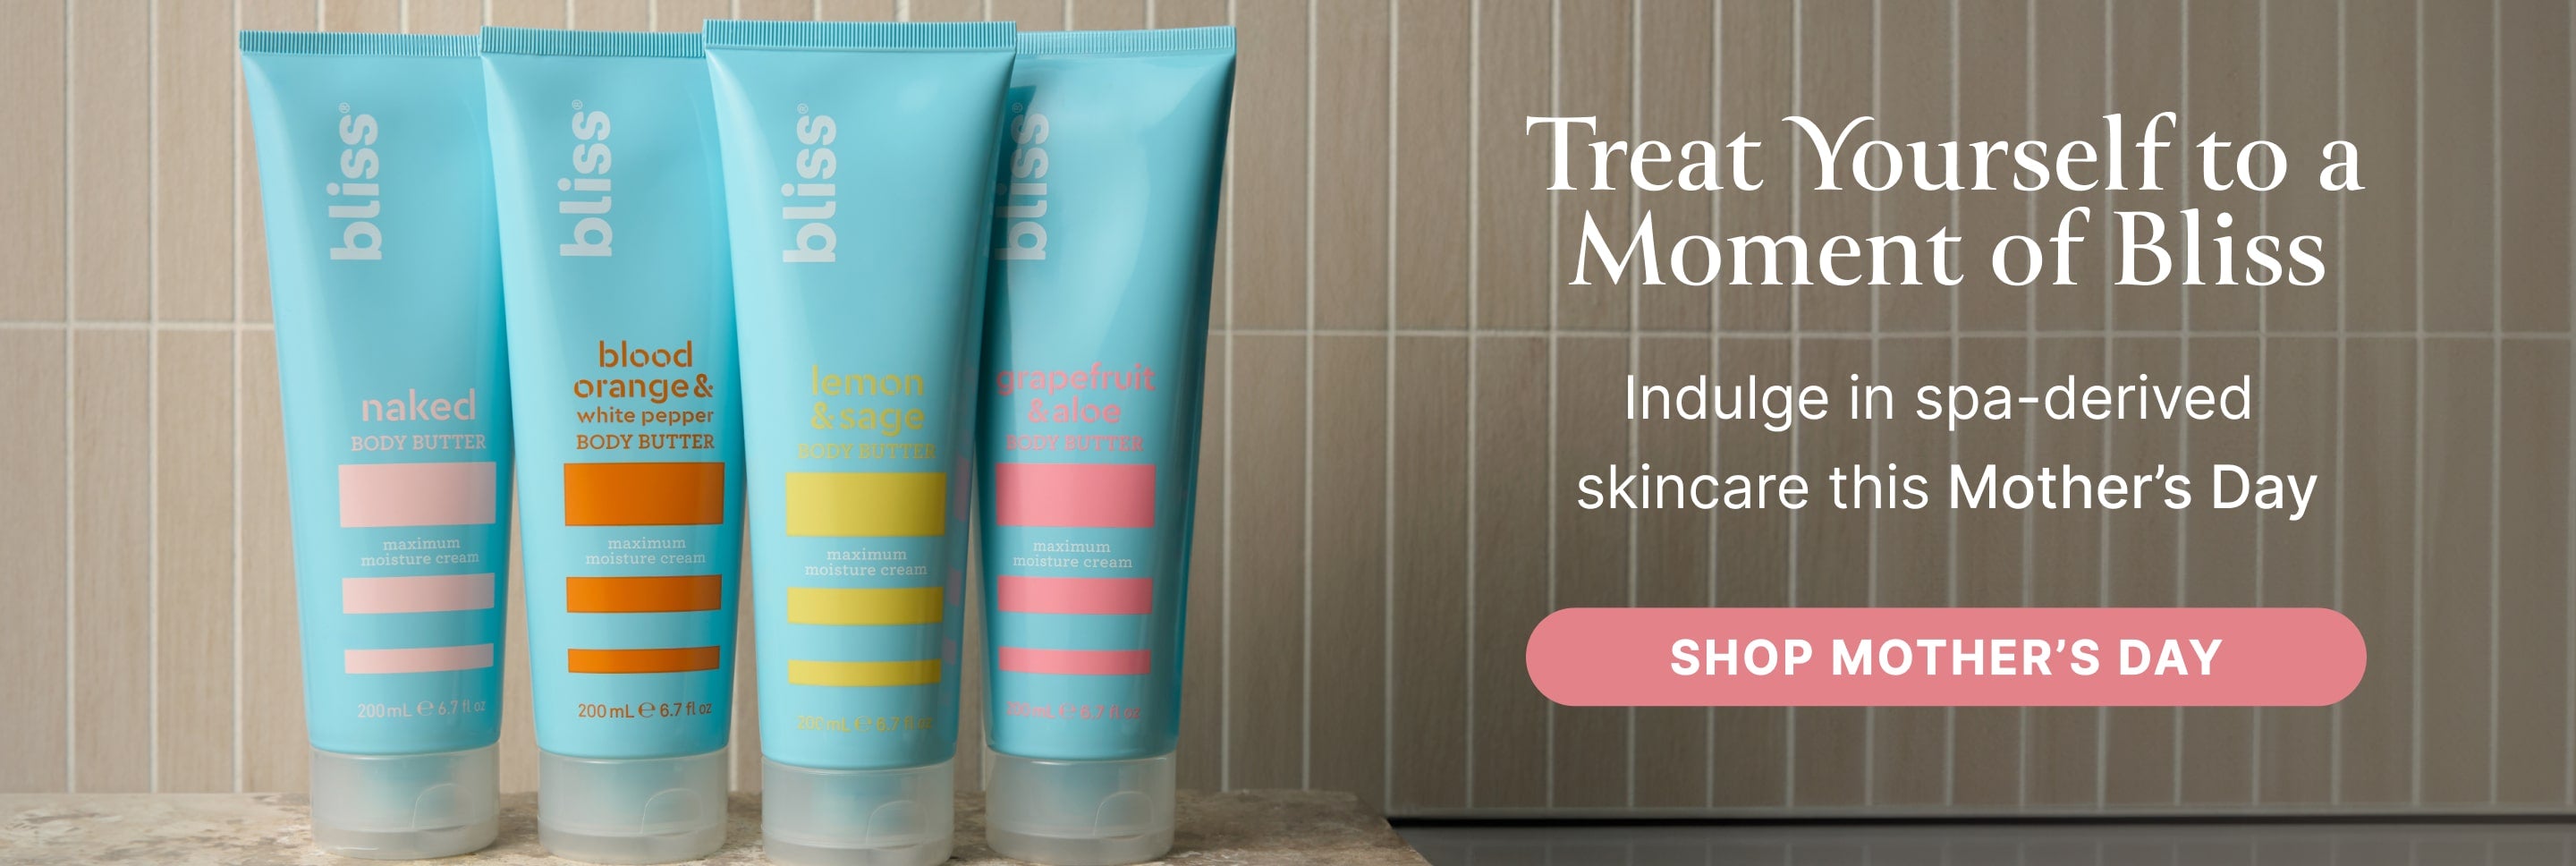 Treat yourself to a moment of Bliss. Indulge in spa-derived skincare this Mother's Day. Shop Mother's Day Now!